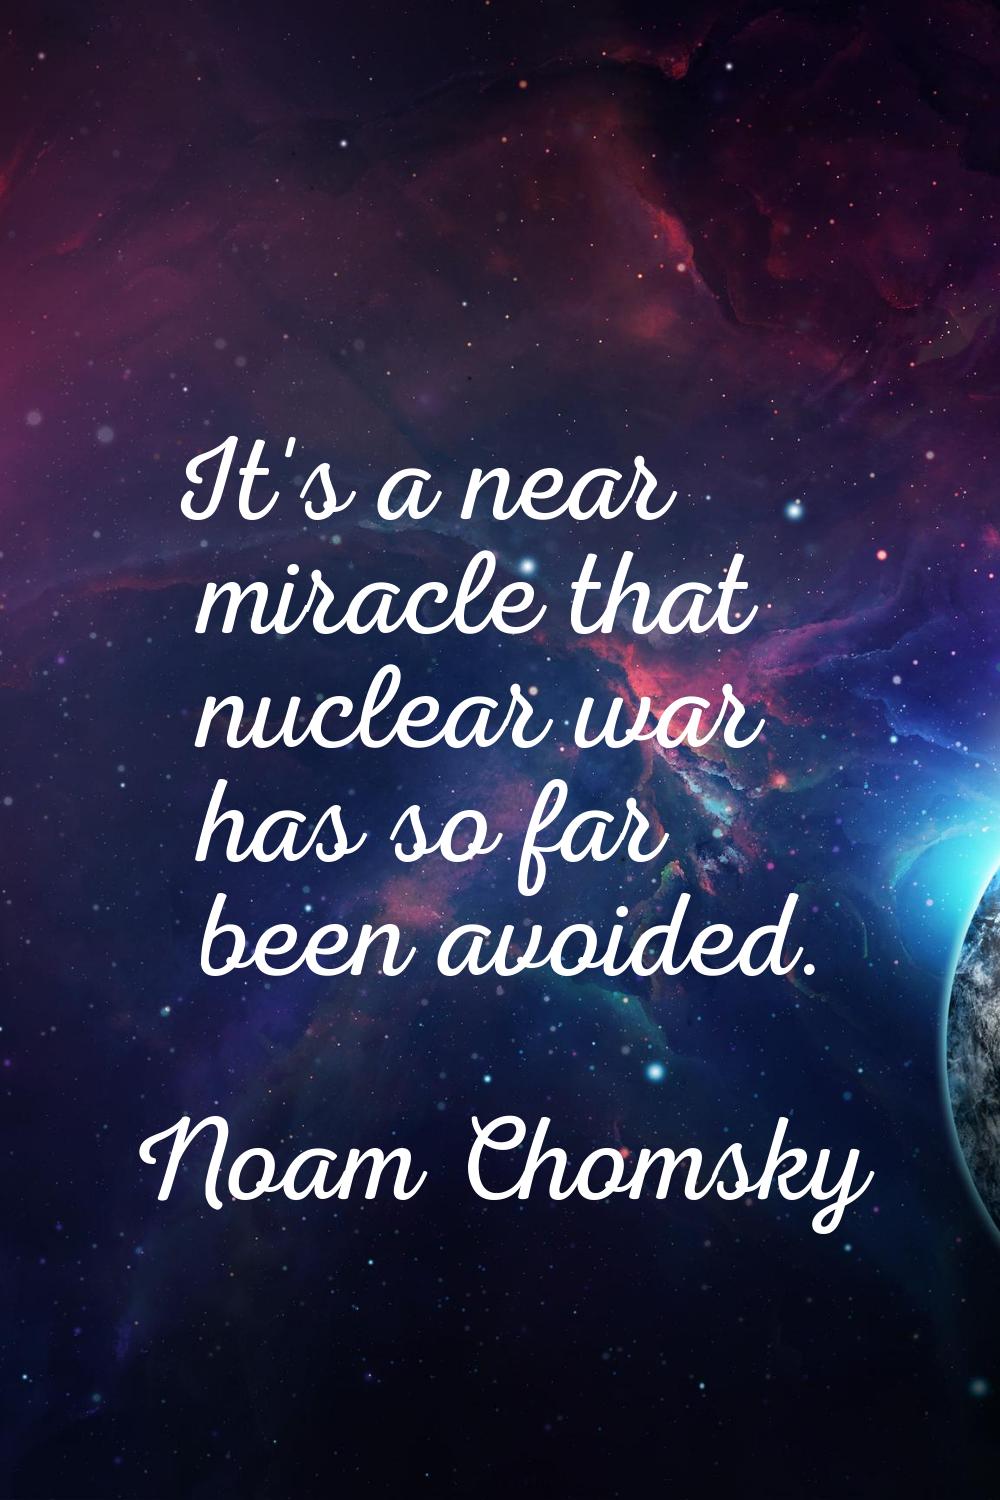 It's a near miracle that nuclear war has so far been avoided.